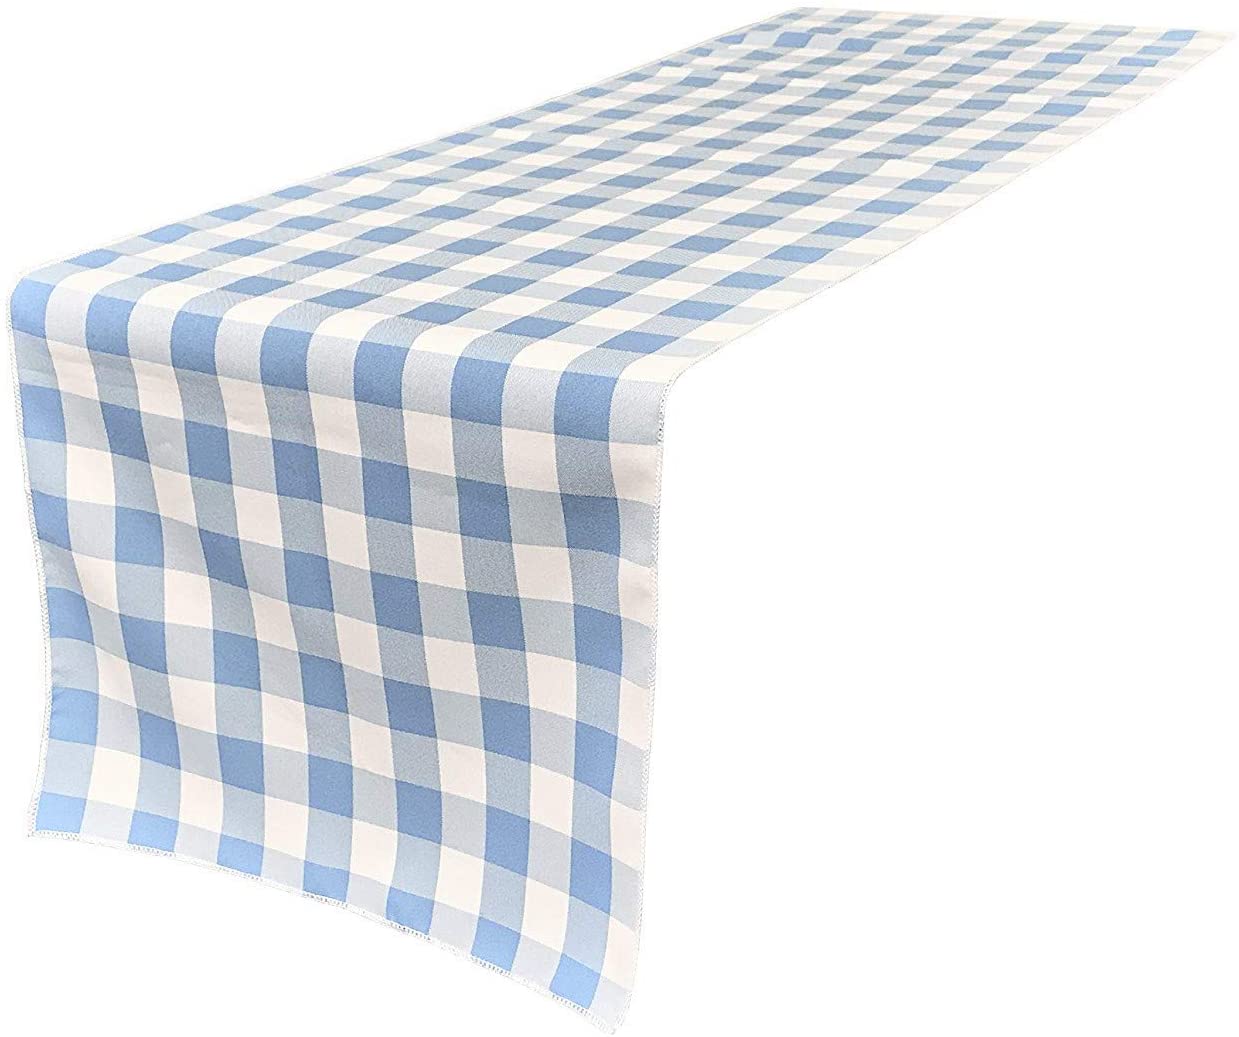 12" Wide by The Size of Your Choice, Polyester Poplin Gingham, Checkered, Plaid Table Runner (White & Light Blue,